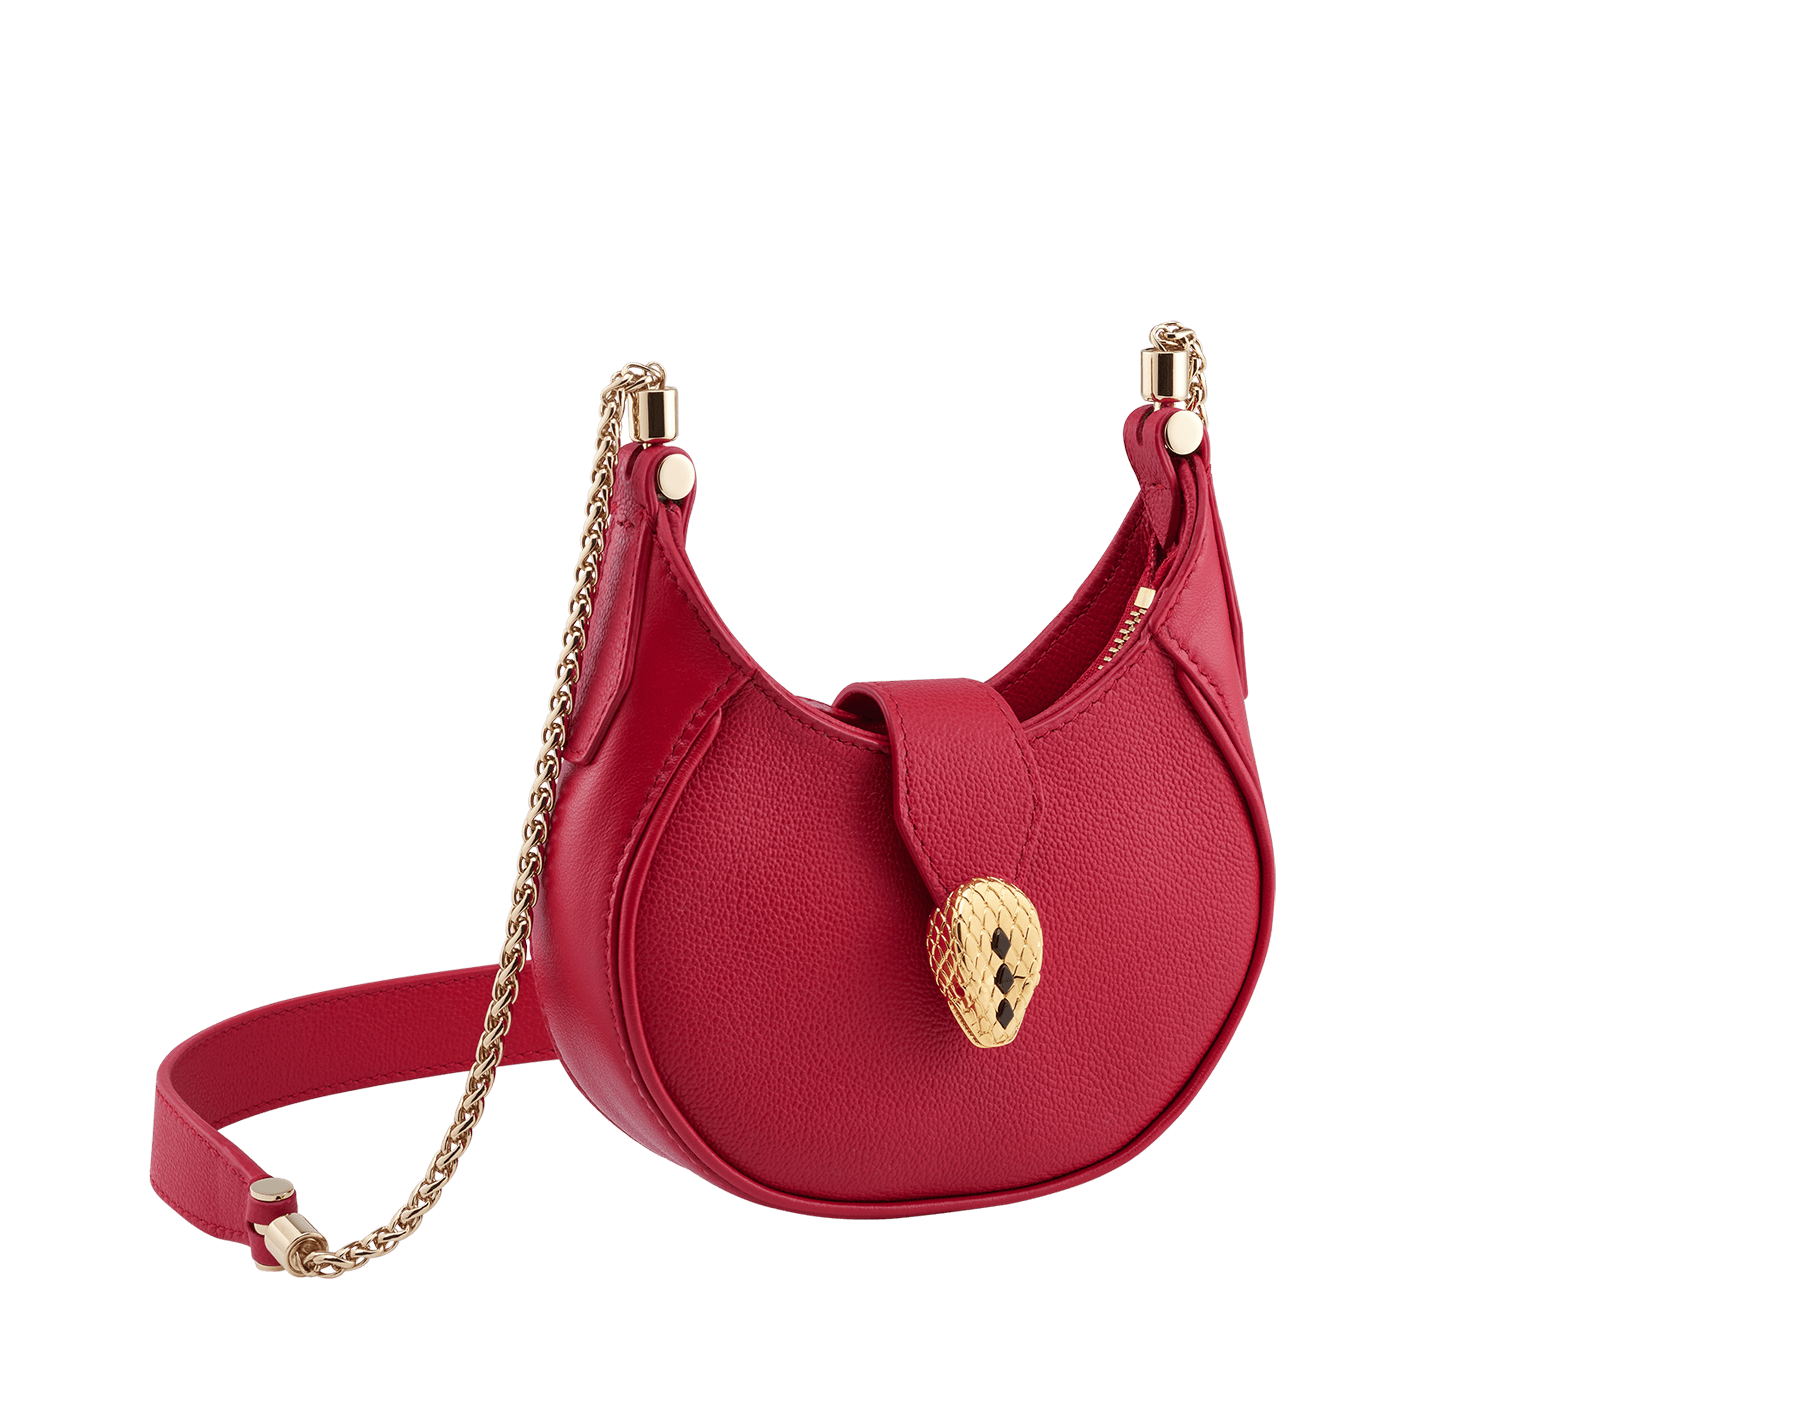 Serpenti Ellipse micro crossbody bag in moon silver black metallic karung skin with black nappa leather lining. Captivating snakehead closure in gold-plated brass embellished with red enamel eyes. SEA-MICROHOBO image 1